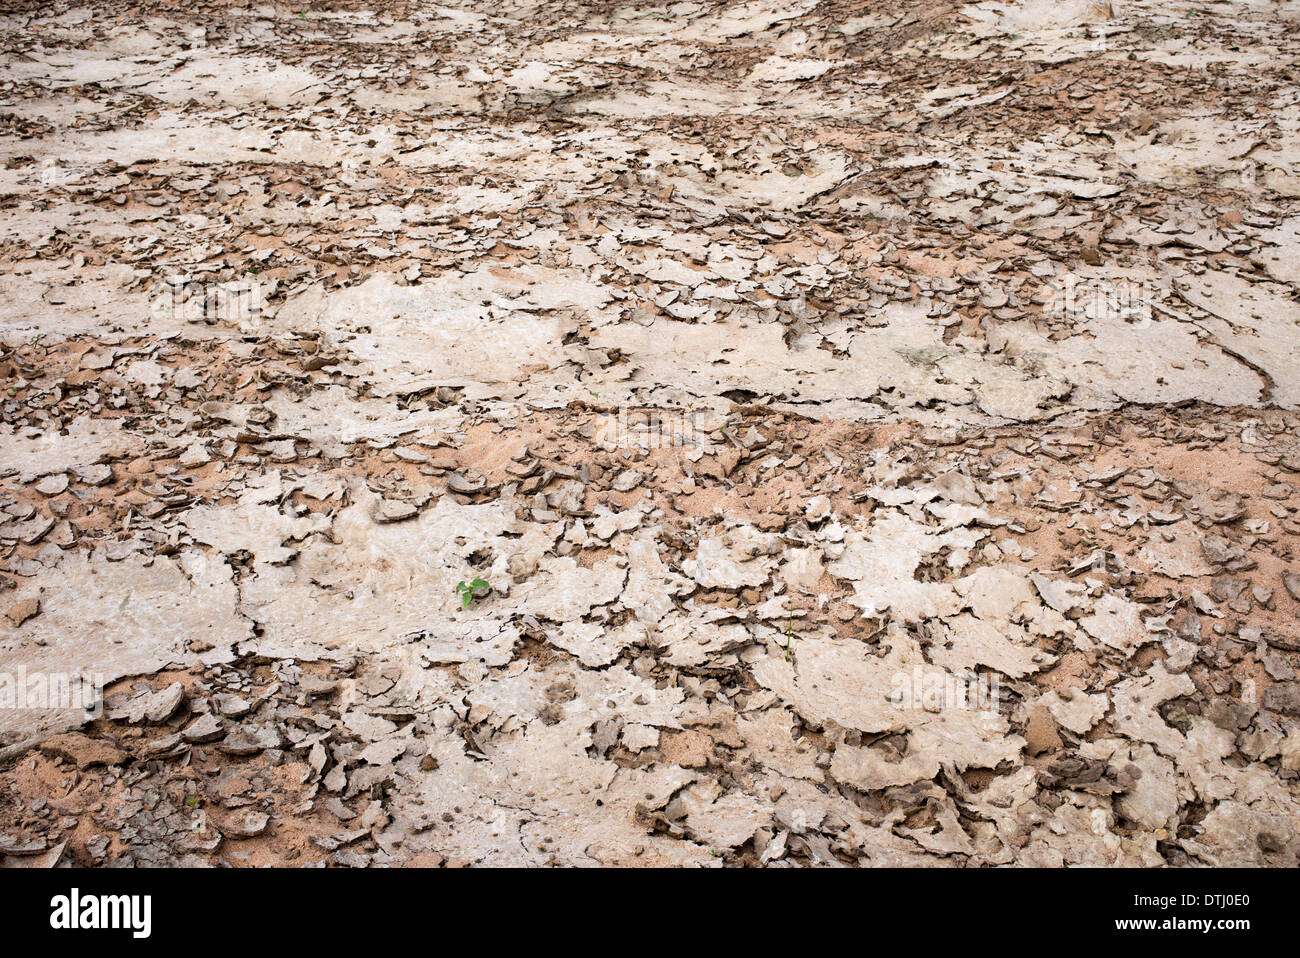 Dried up river bed in India Stock Photo